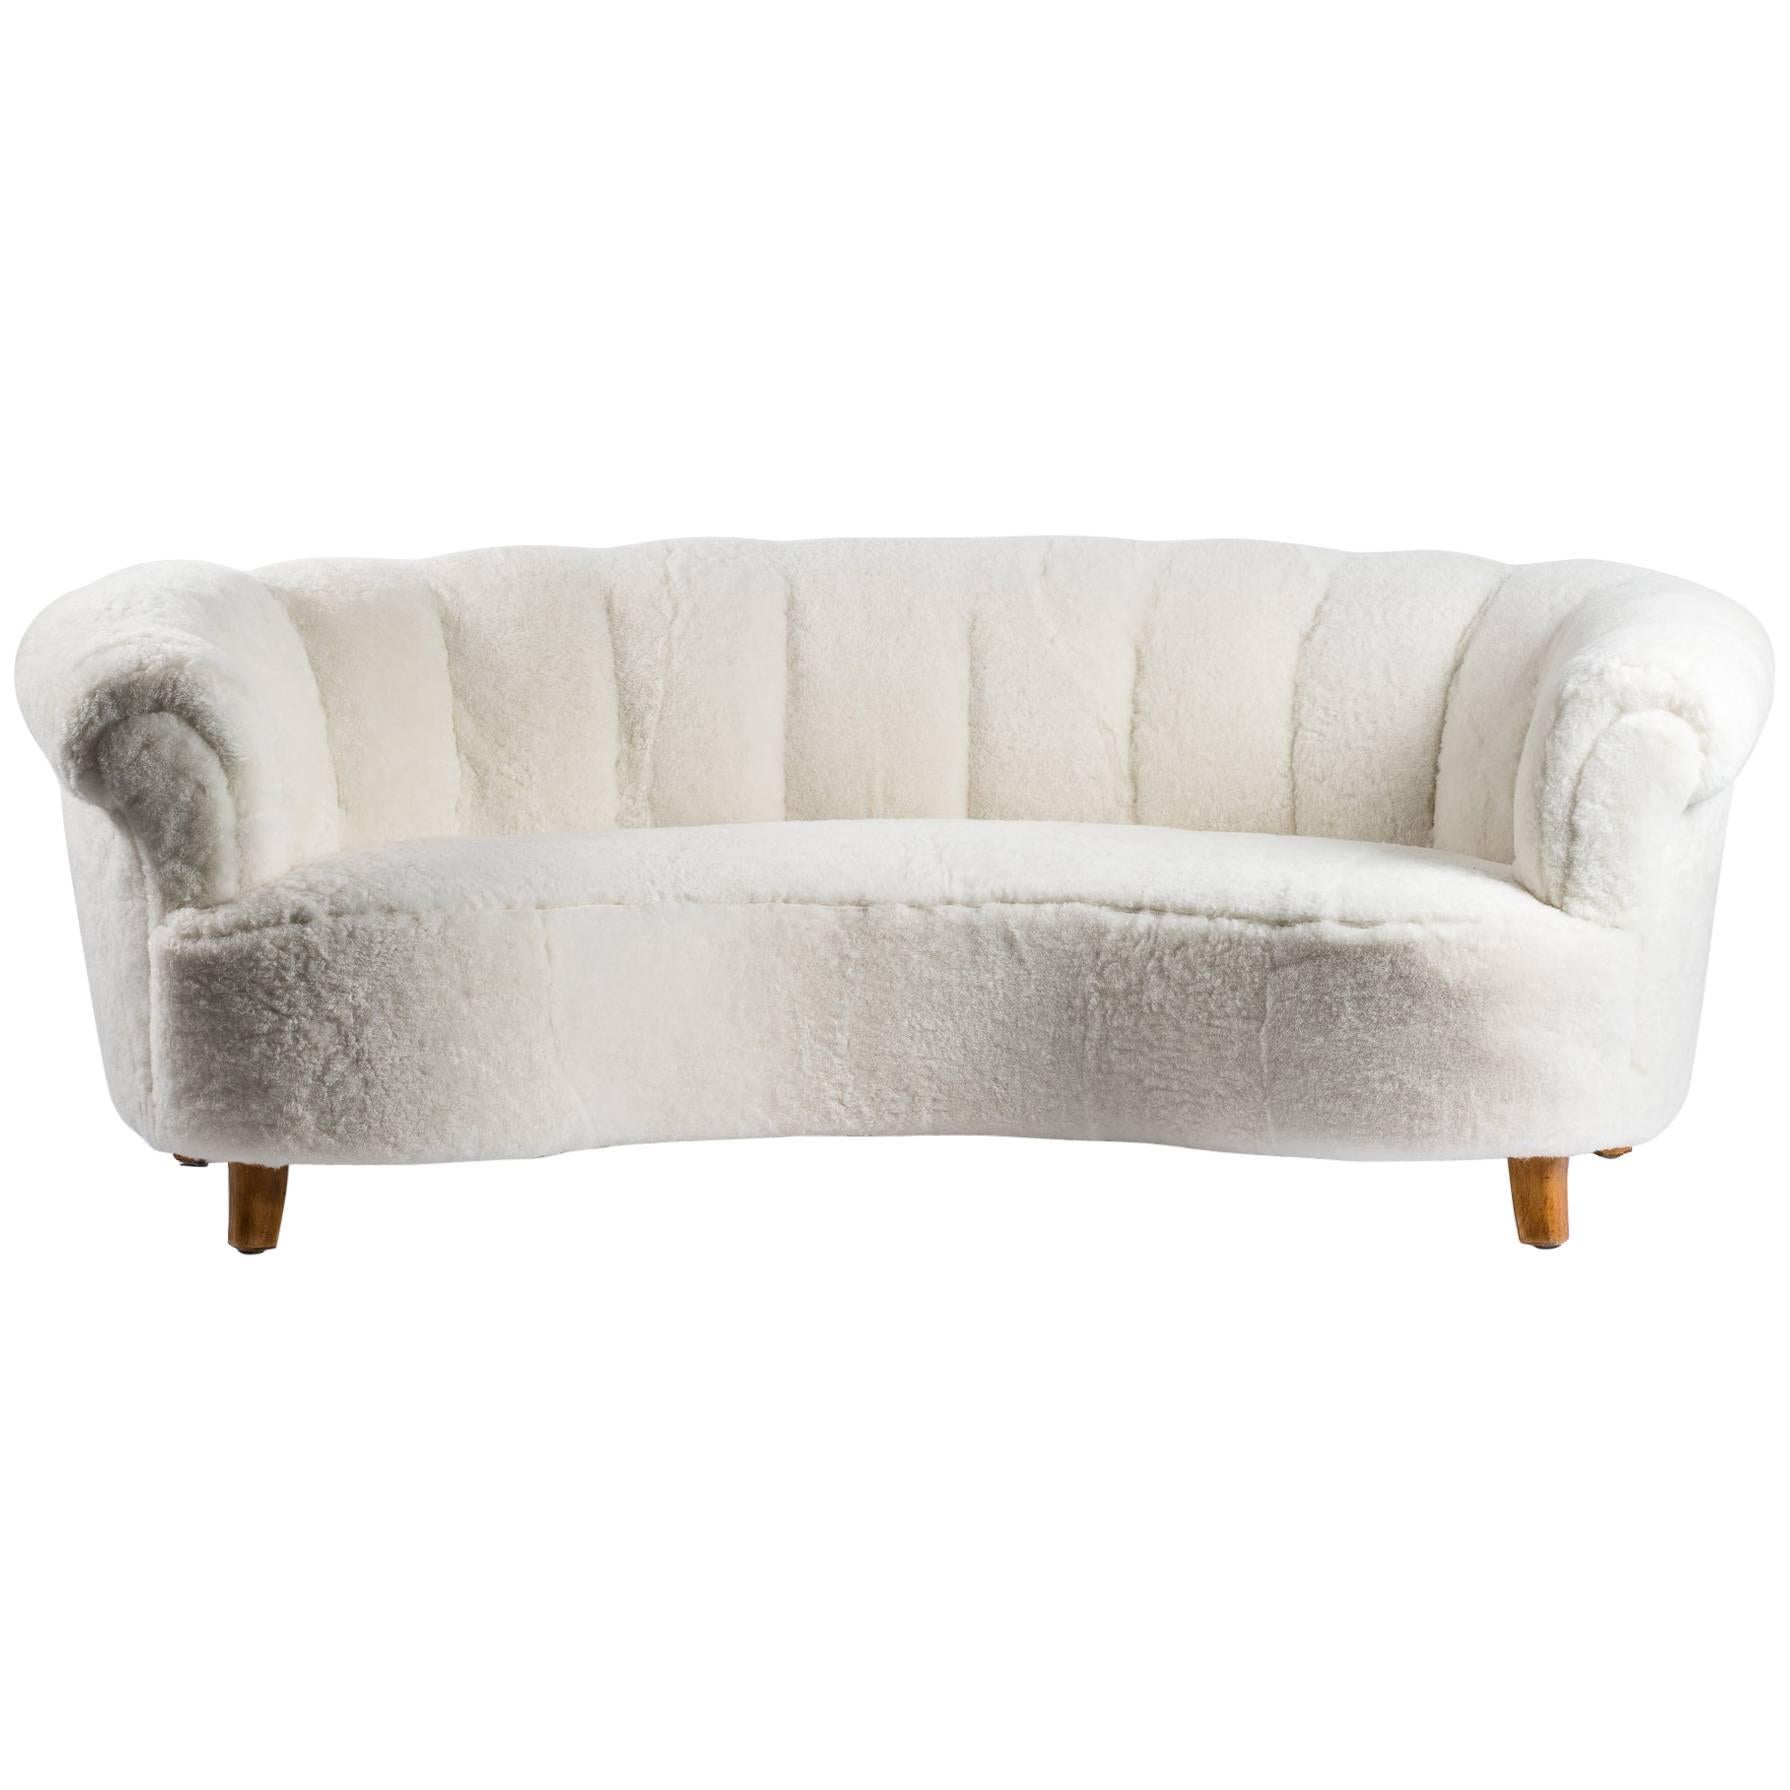 Vintage Scandinavian Sofa with Shearling Upholstery